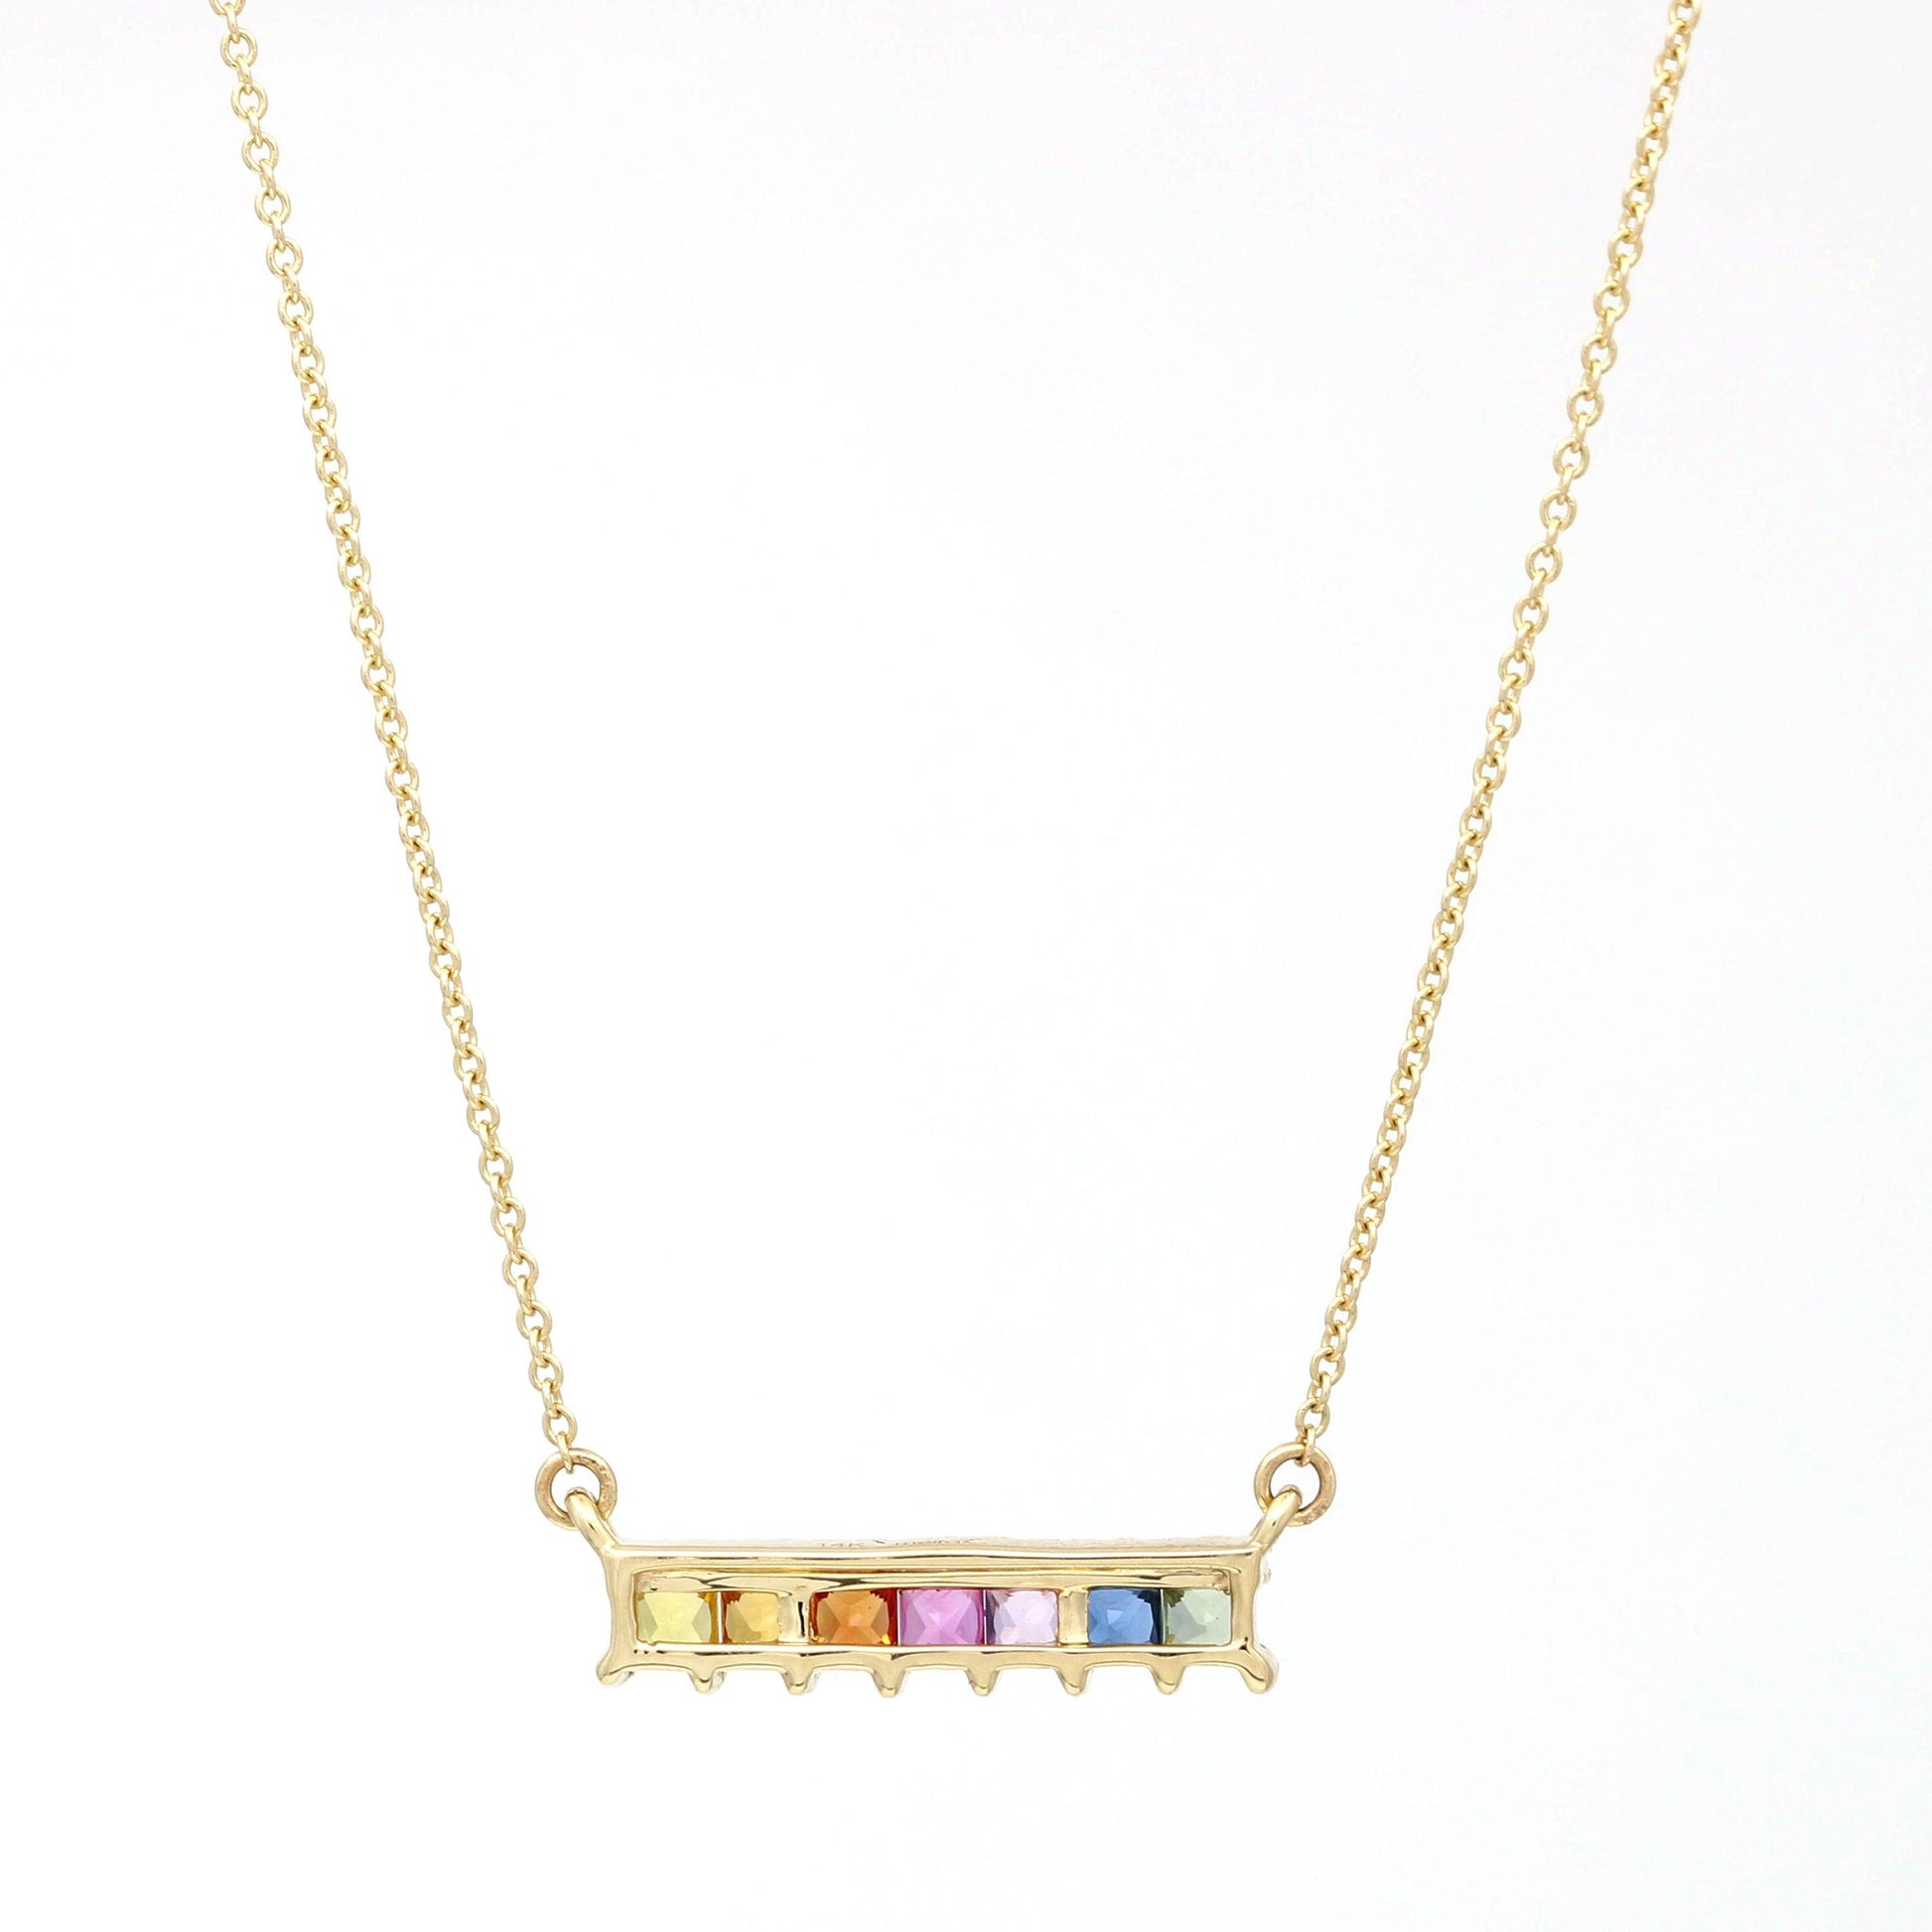 Meira T Diamond Rainbow Sapphire Bar Necklace in 14k Rose Gold - 31 Jewels Inc.